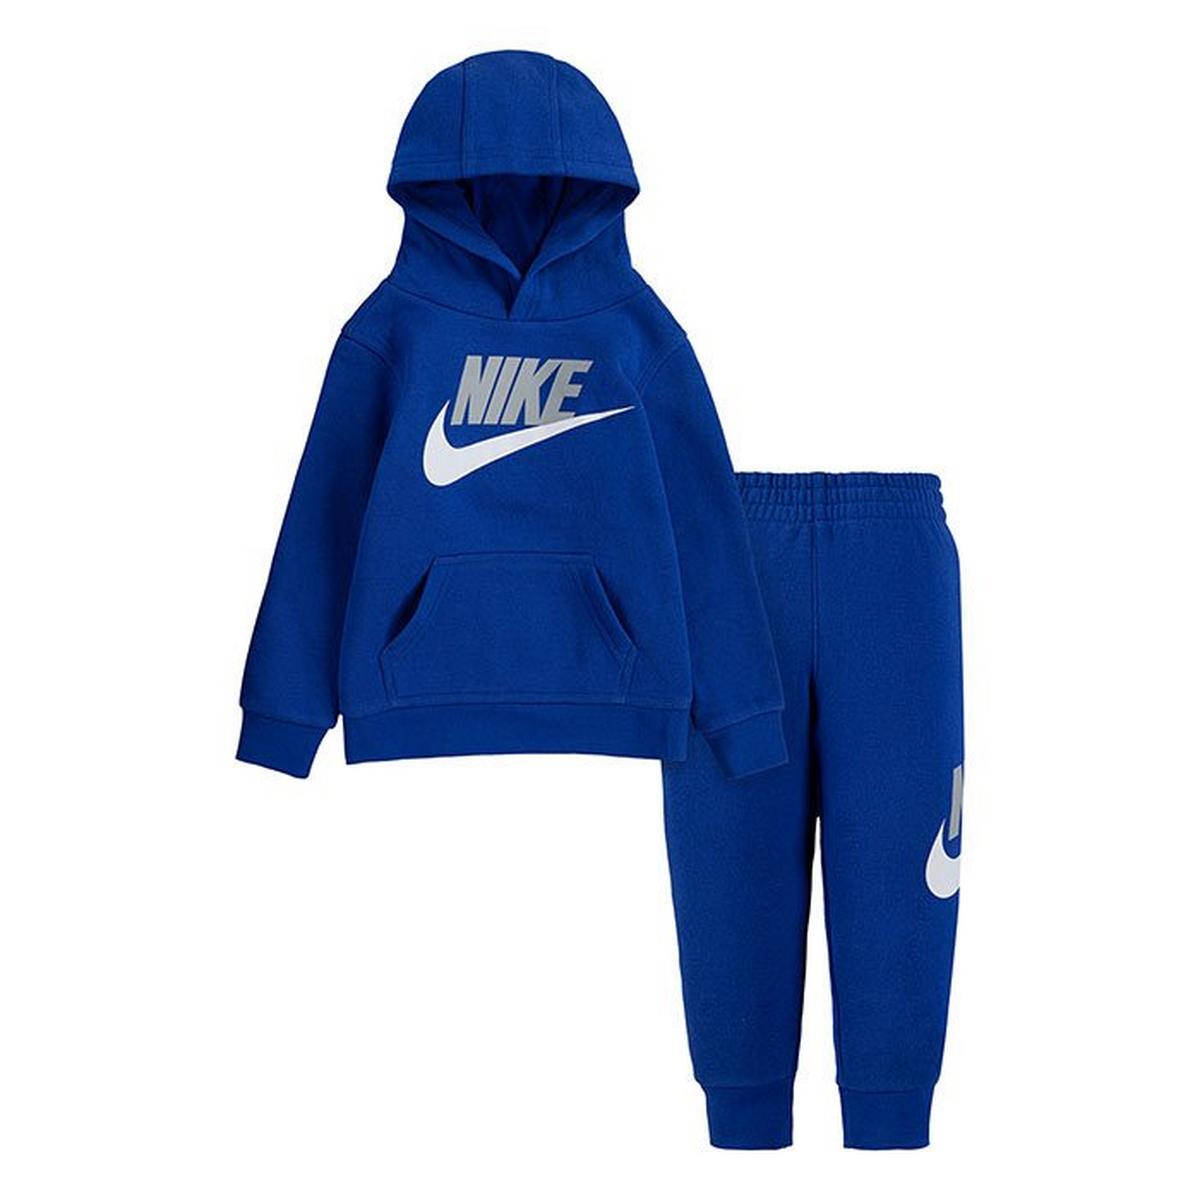 Boys' [2-4T] Hoodie + Jogger Two-Piece Set